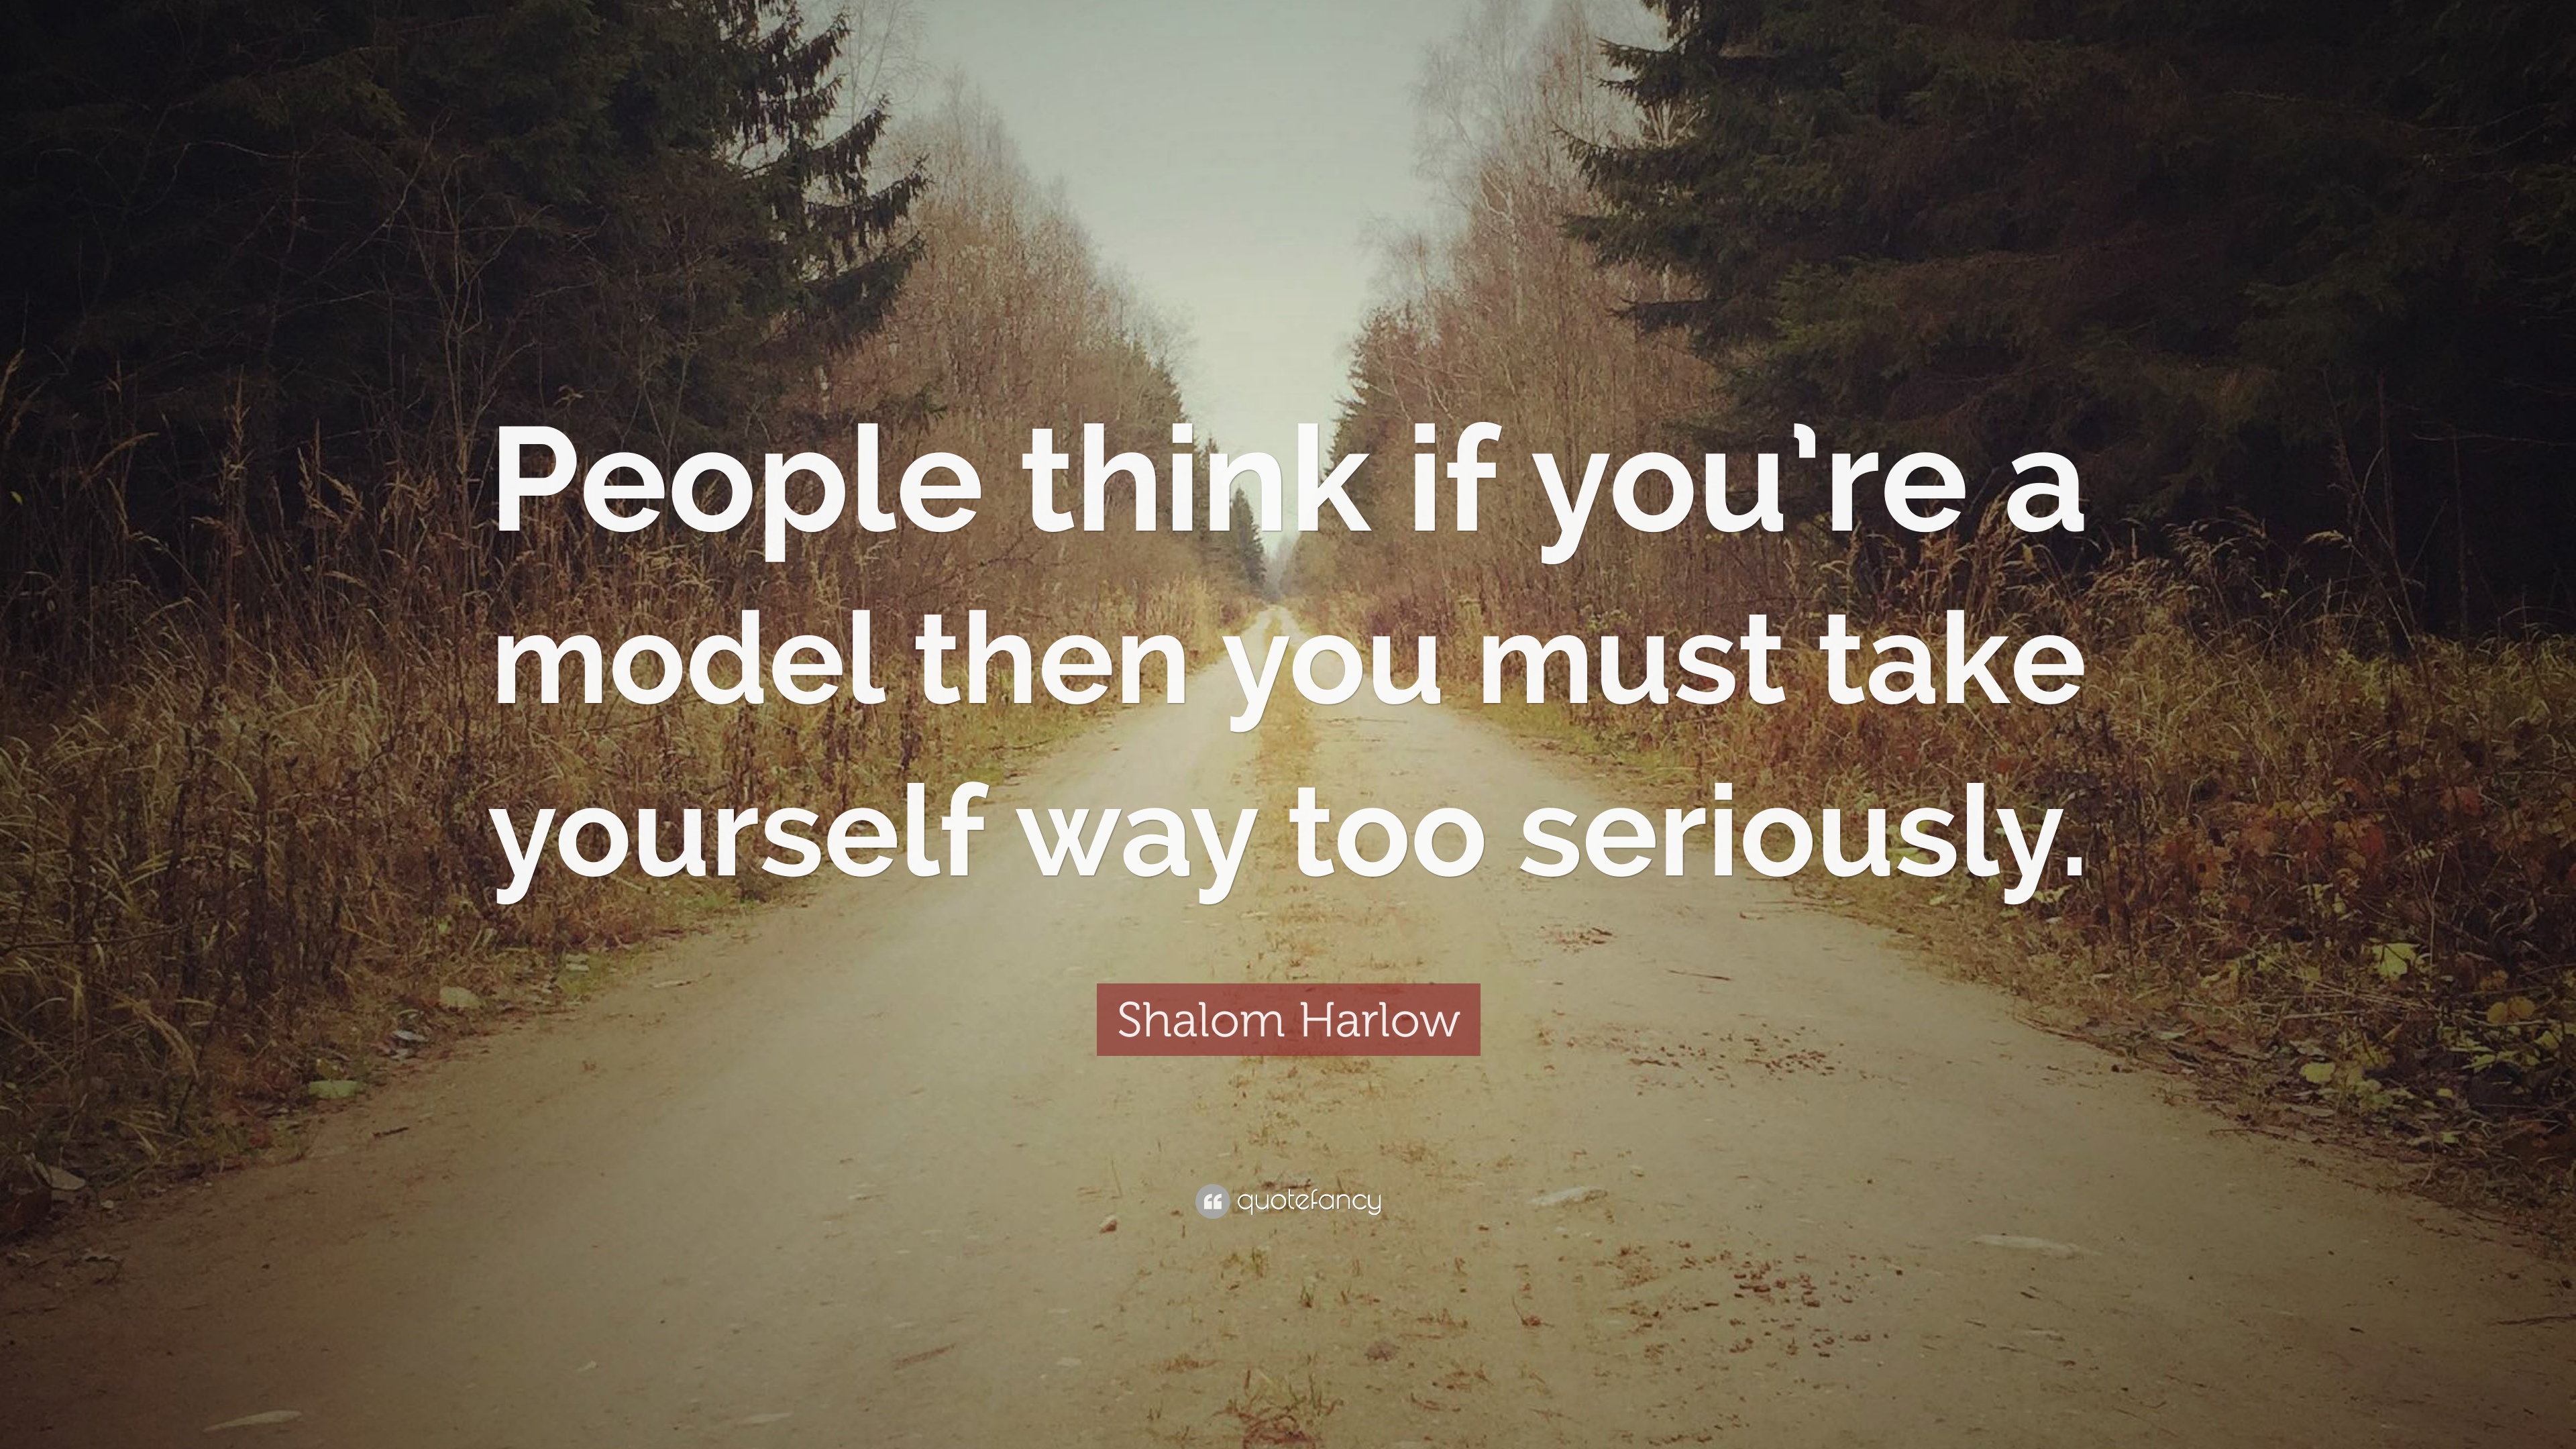 Shalom Harlow Quote: “People think if you're a model then you must